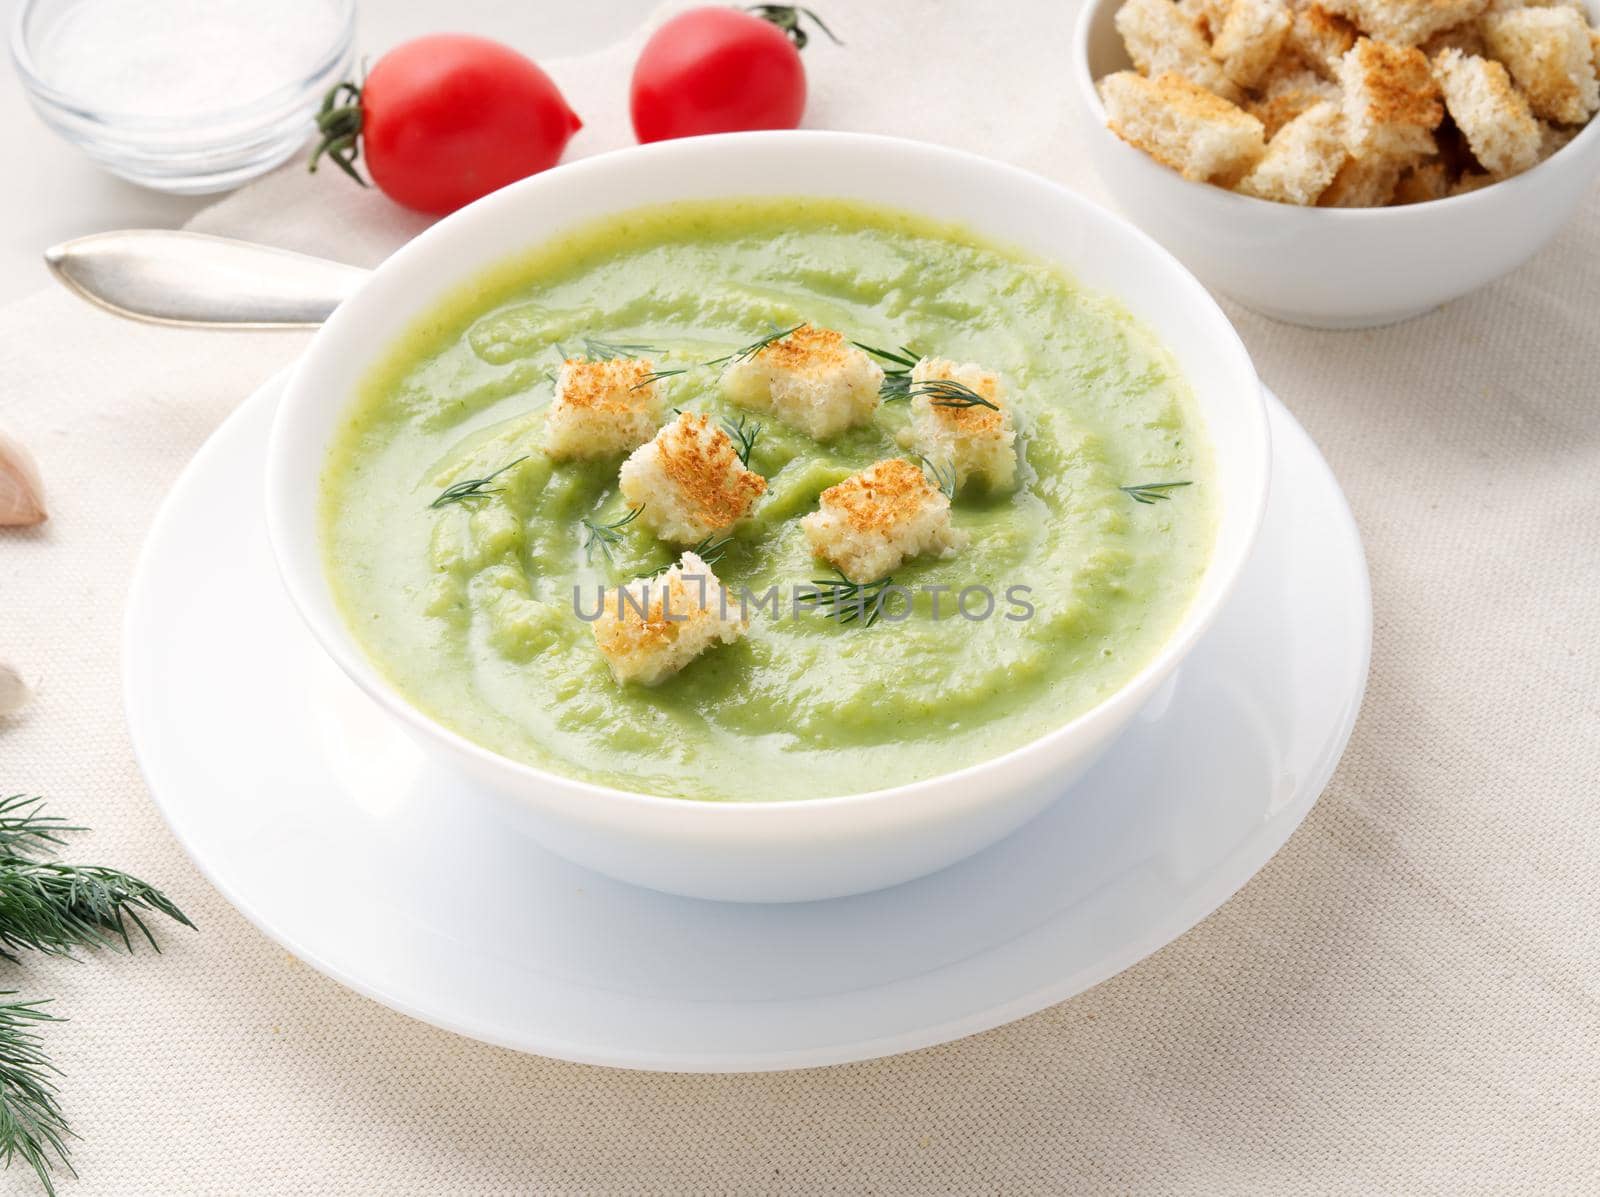 large white bowl with vegetable green cream soup of broccoli, zucchini, green peas on a white background, side view